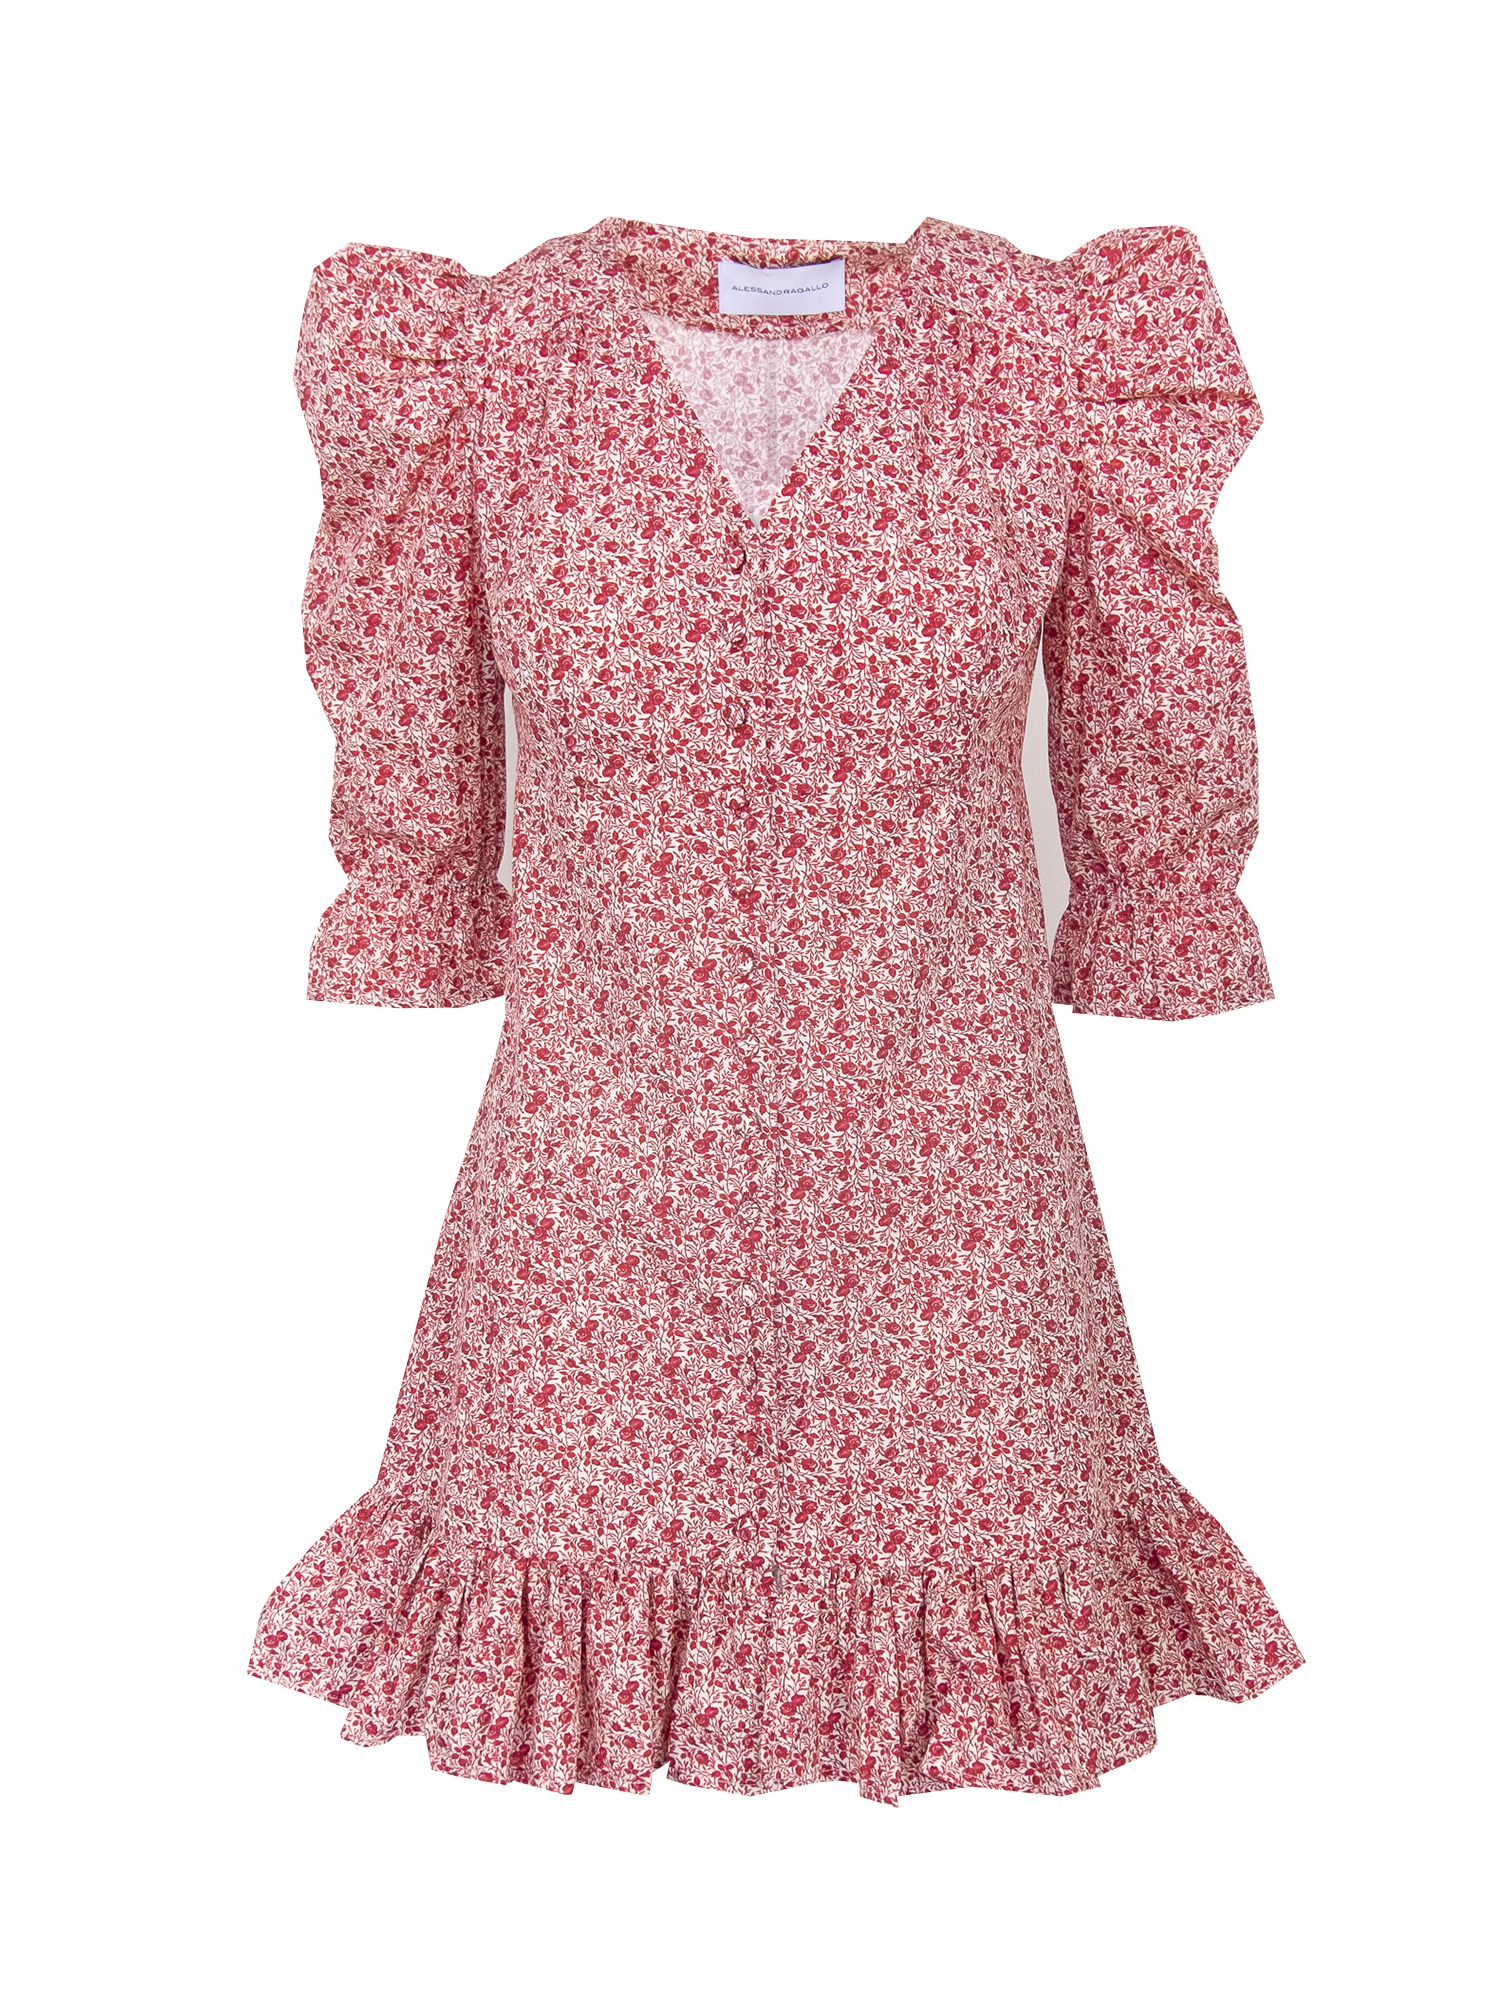 DALIA - v neck dress with 3\4 puffball sleeves and volant in cotton Mirabell print